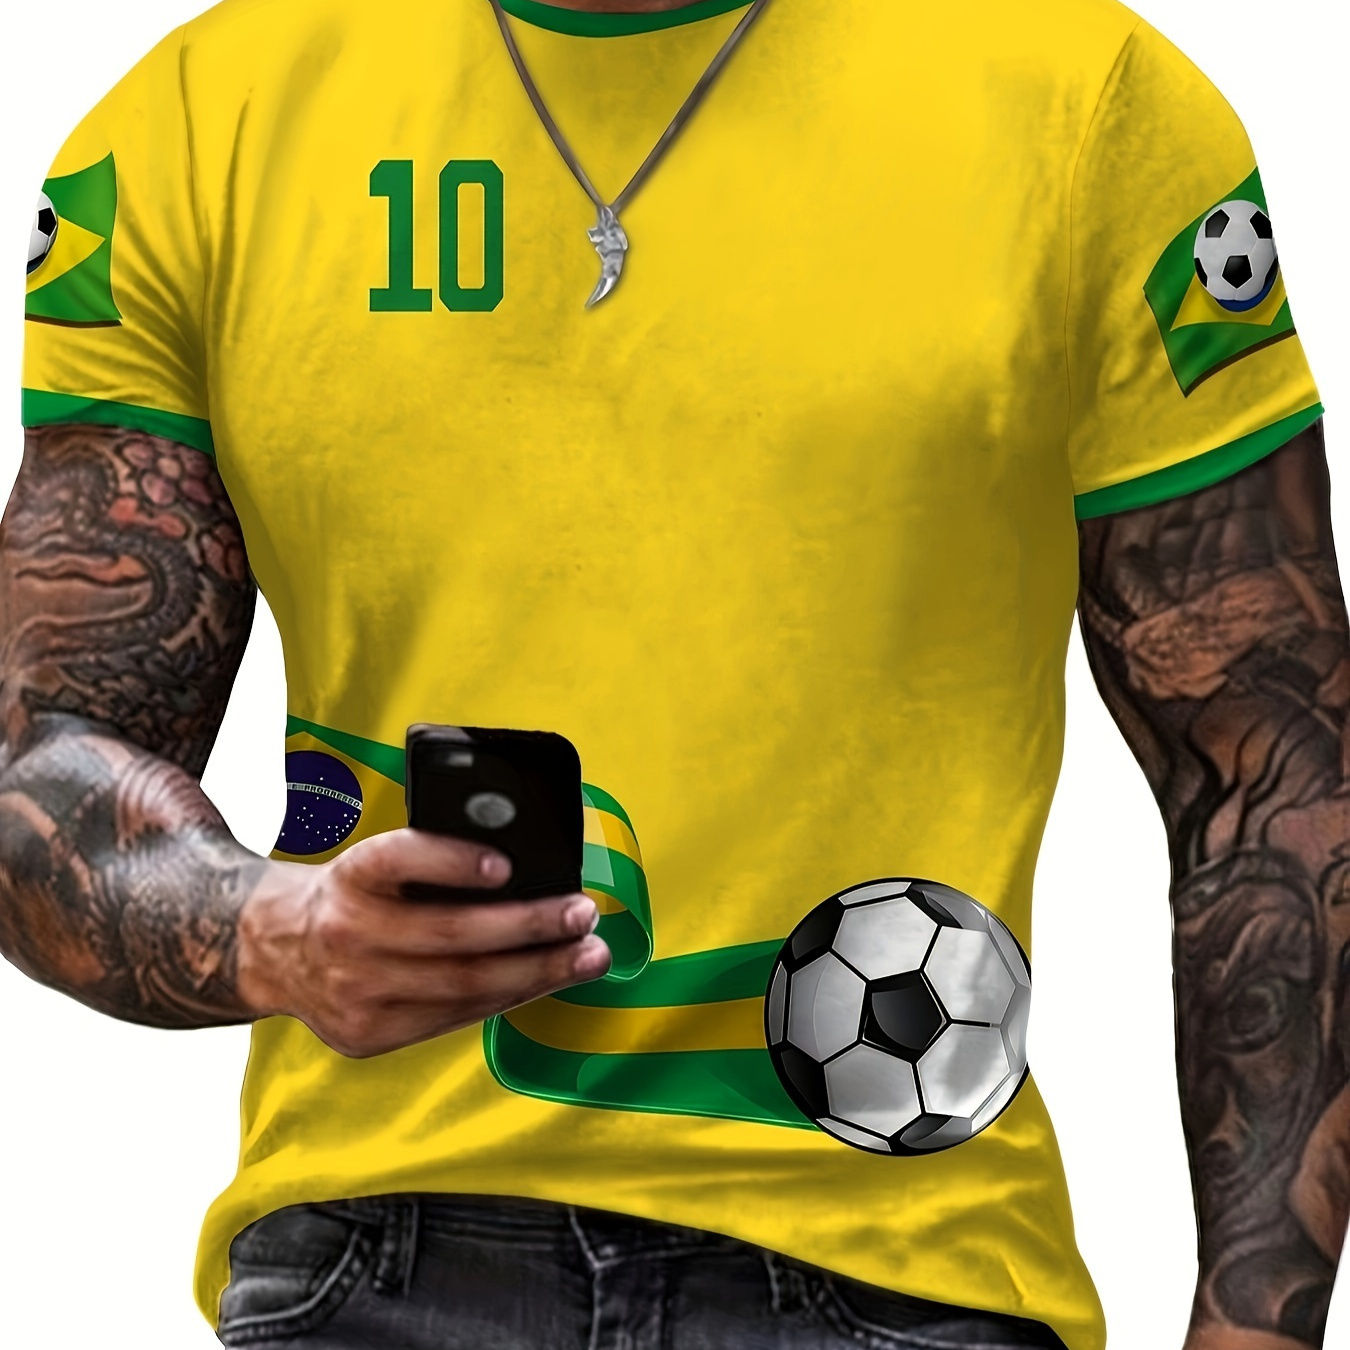 

Soccer And Number 10 Pattern Men's Fashion Crew Neck Short Sleeve Sports Tee, Versatile And Comfortable T-shirt, Athletic Style Clothing For Summer And Spring, As Gifts